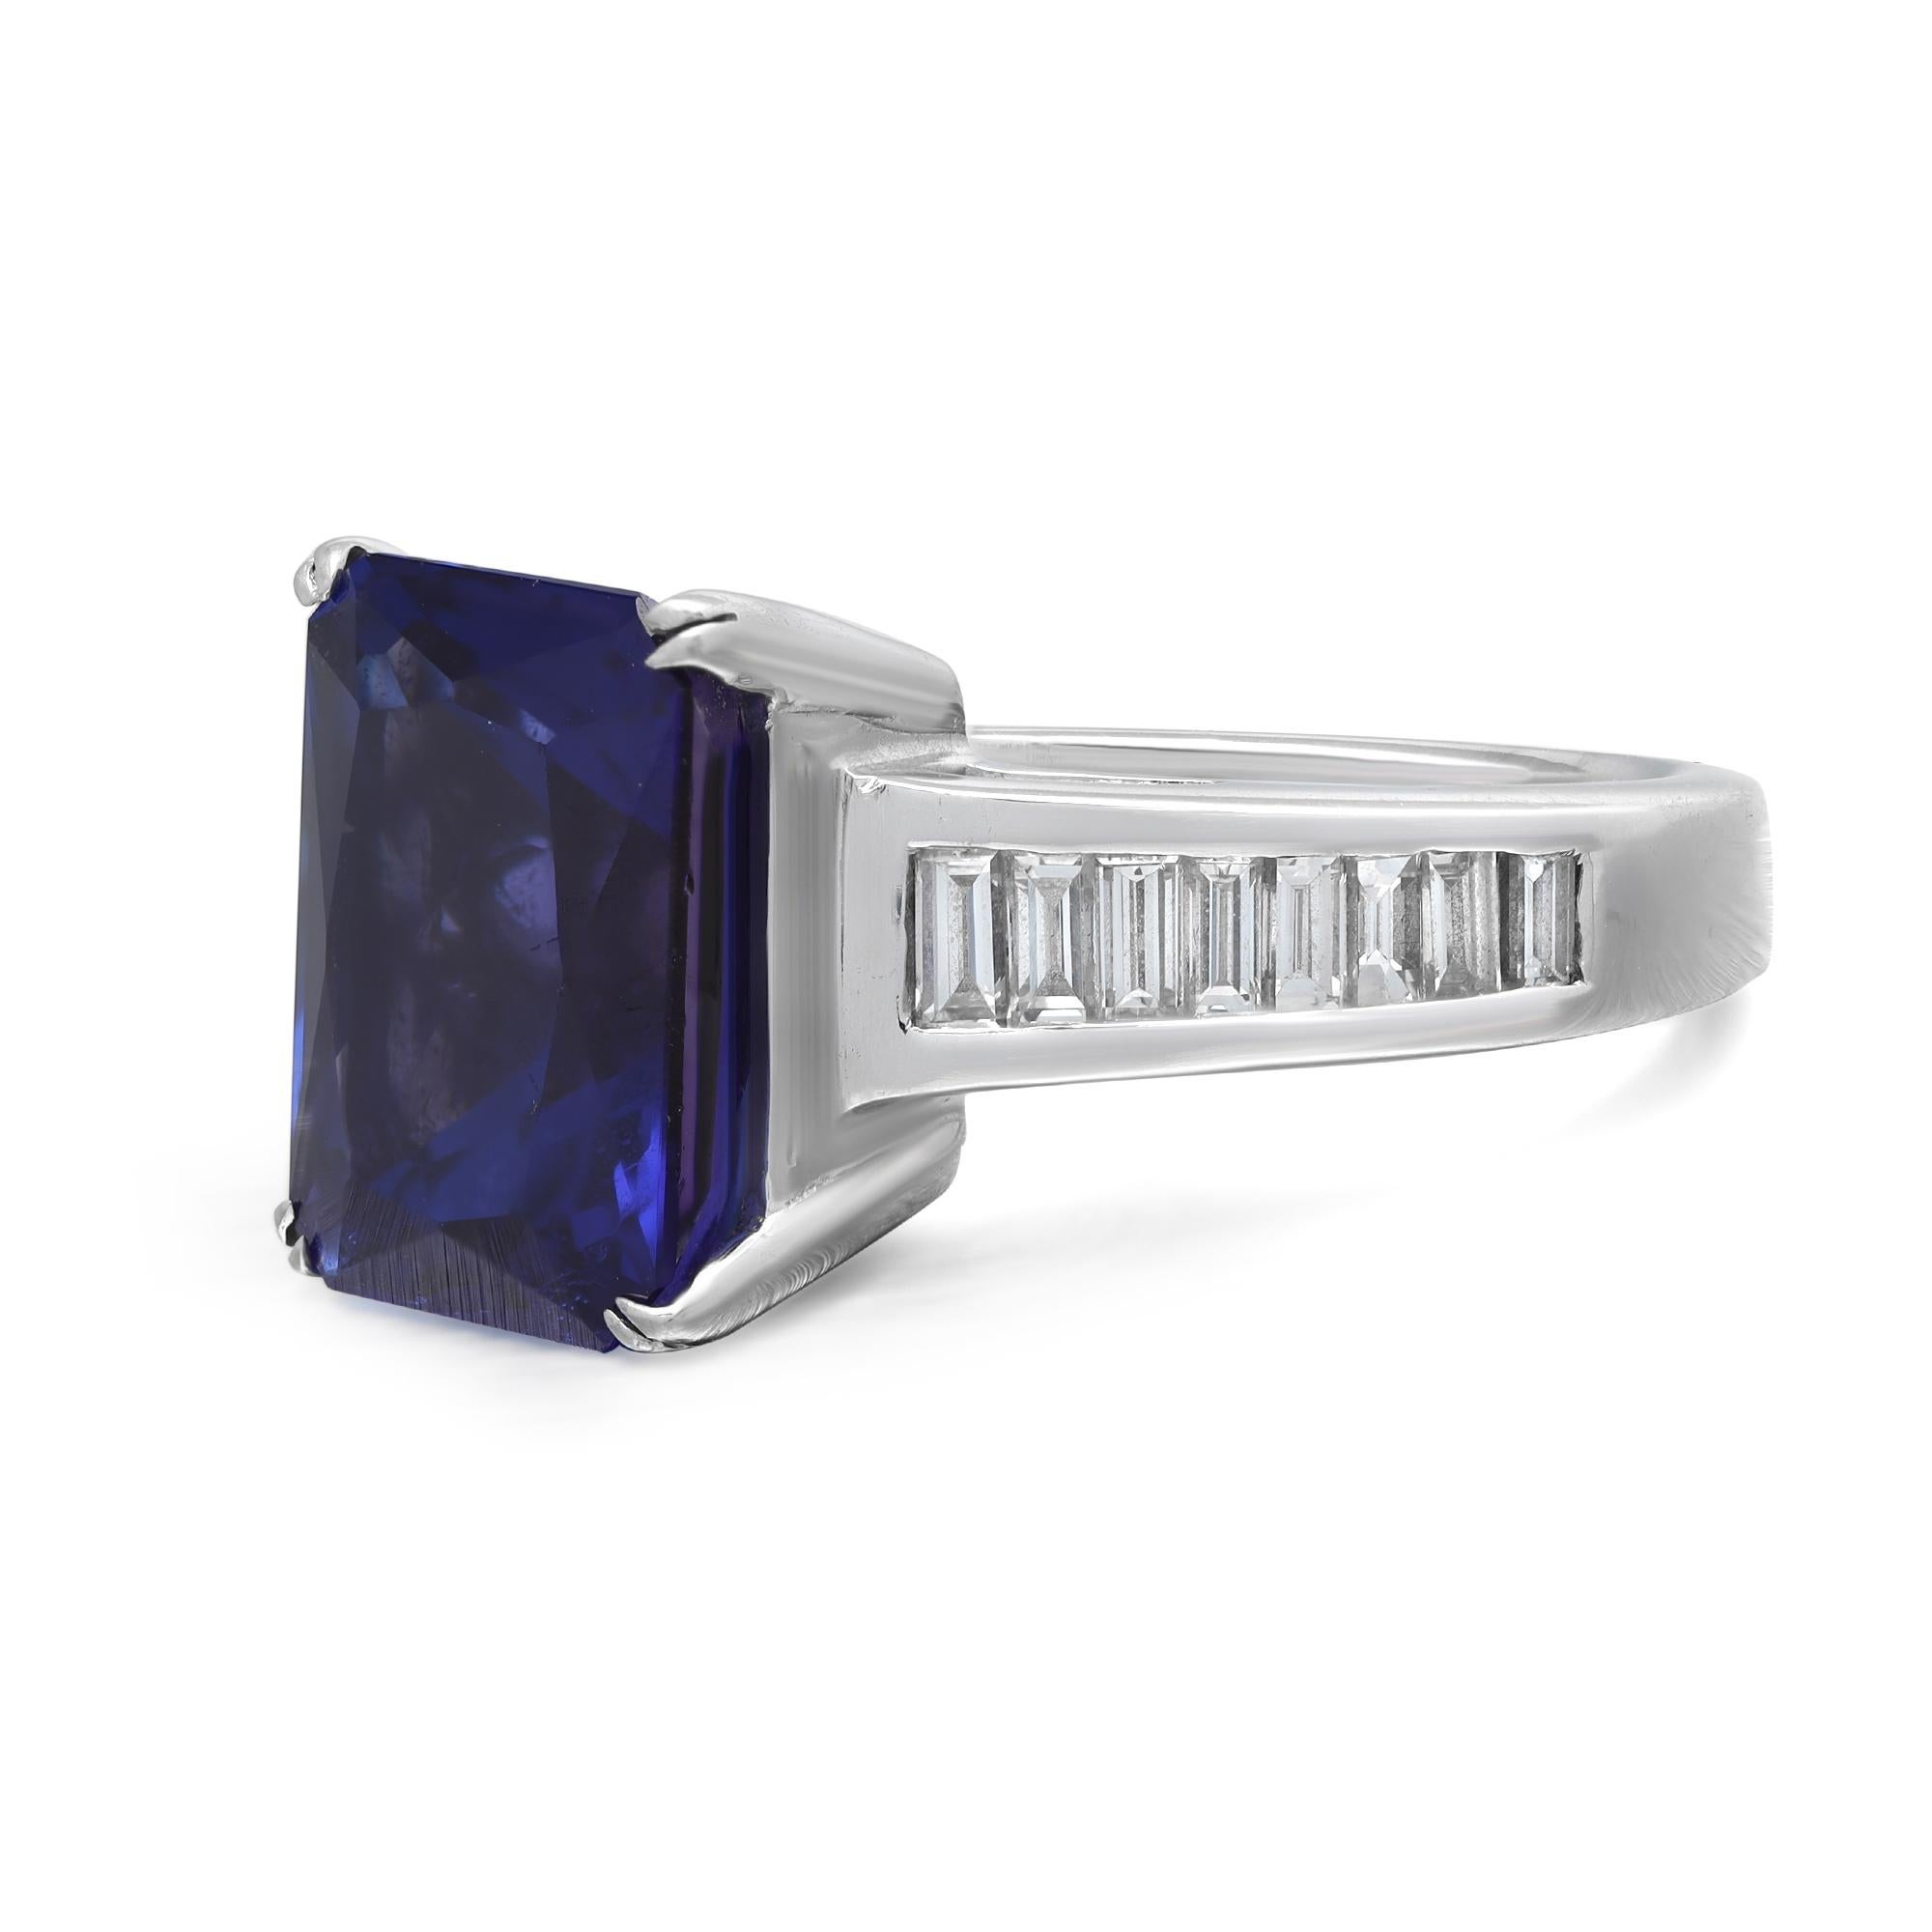 This luxurious engagement ring features prong set emerald cut violetish blue Tanzanite as the center stone with channel set baguette cut diamonds set halfway through the band. Crafted in 18K white gold. Total Tanzanite weight: 8.47 carats. Total